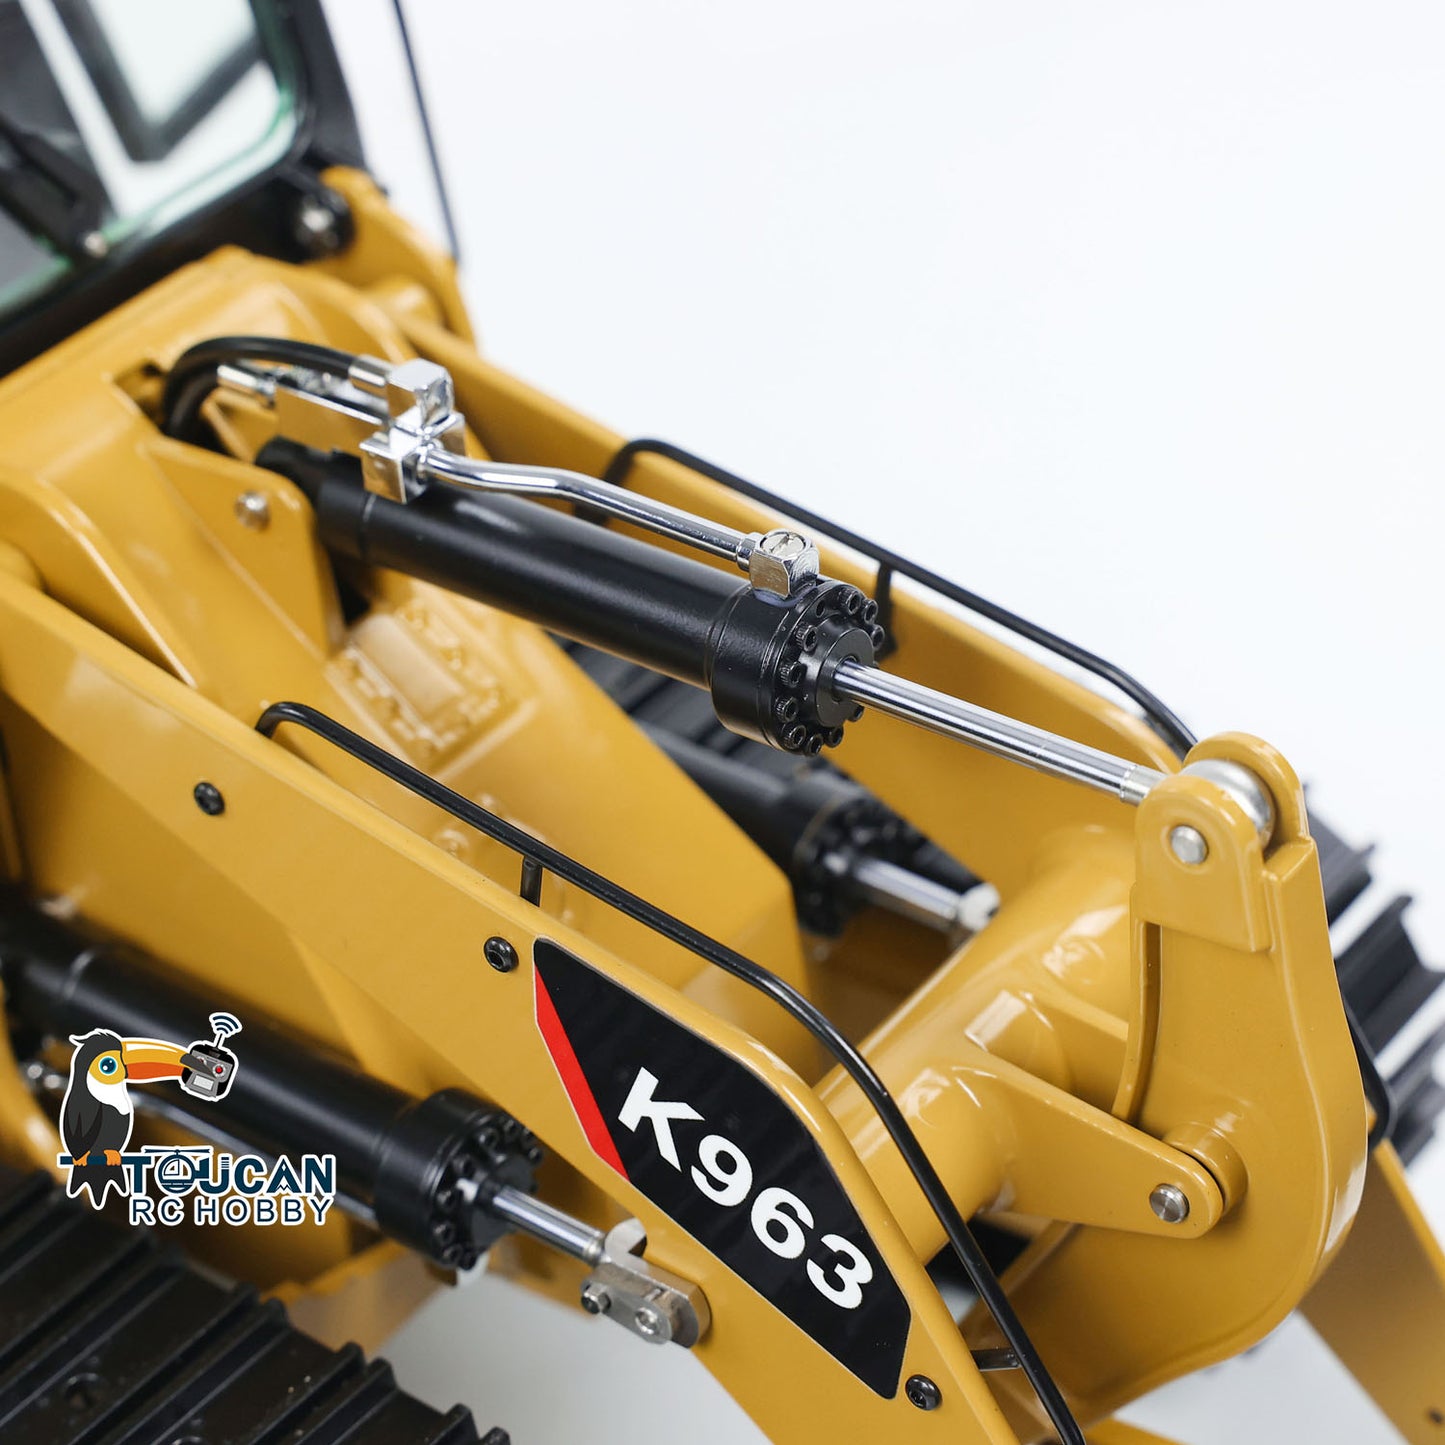 IN STOCK Kabolite 1/16 Hydraulic RC Loader K963-100 Remote Control Construction Vehicles Painted Assembled ST8 Servo Motor ESC